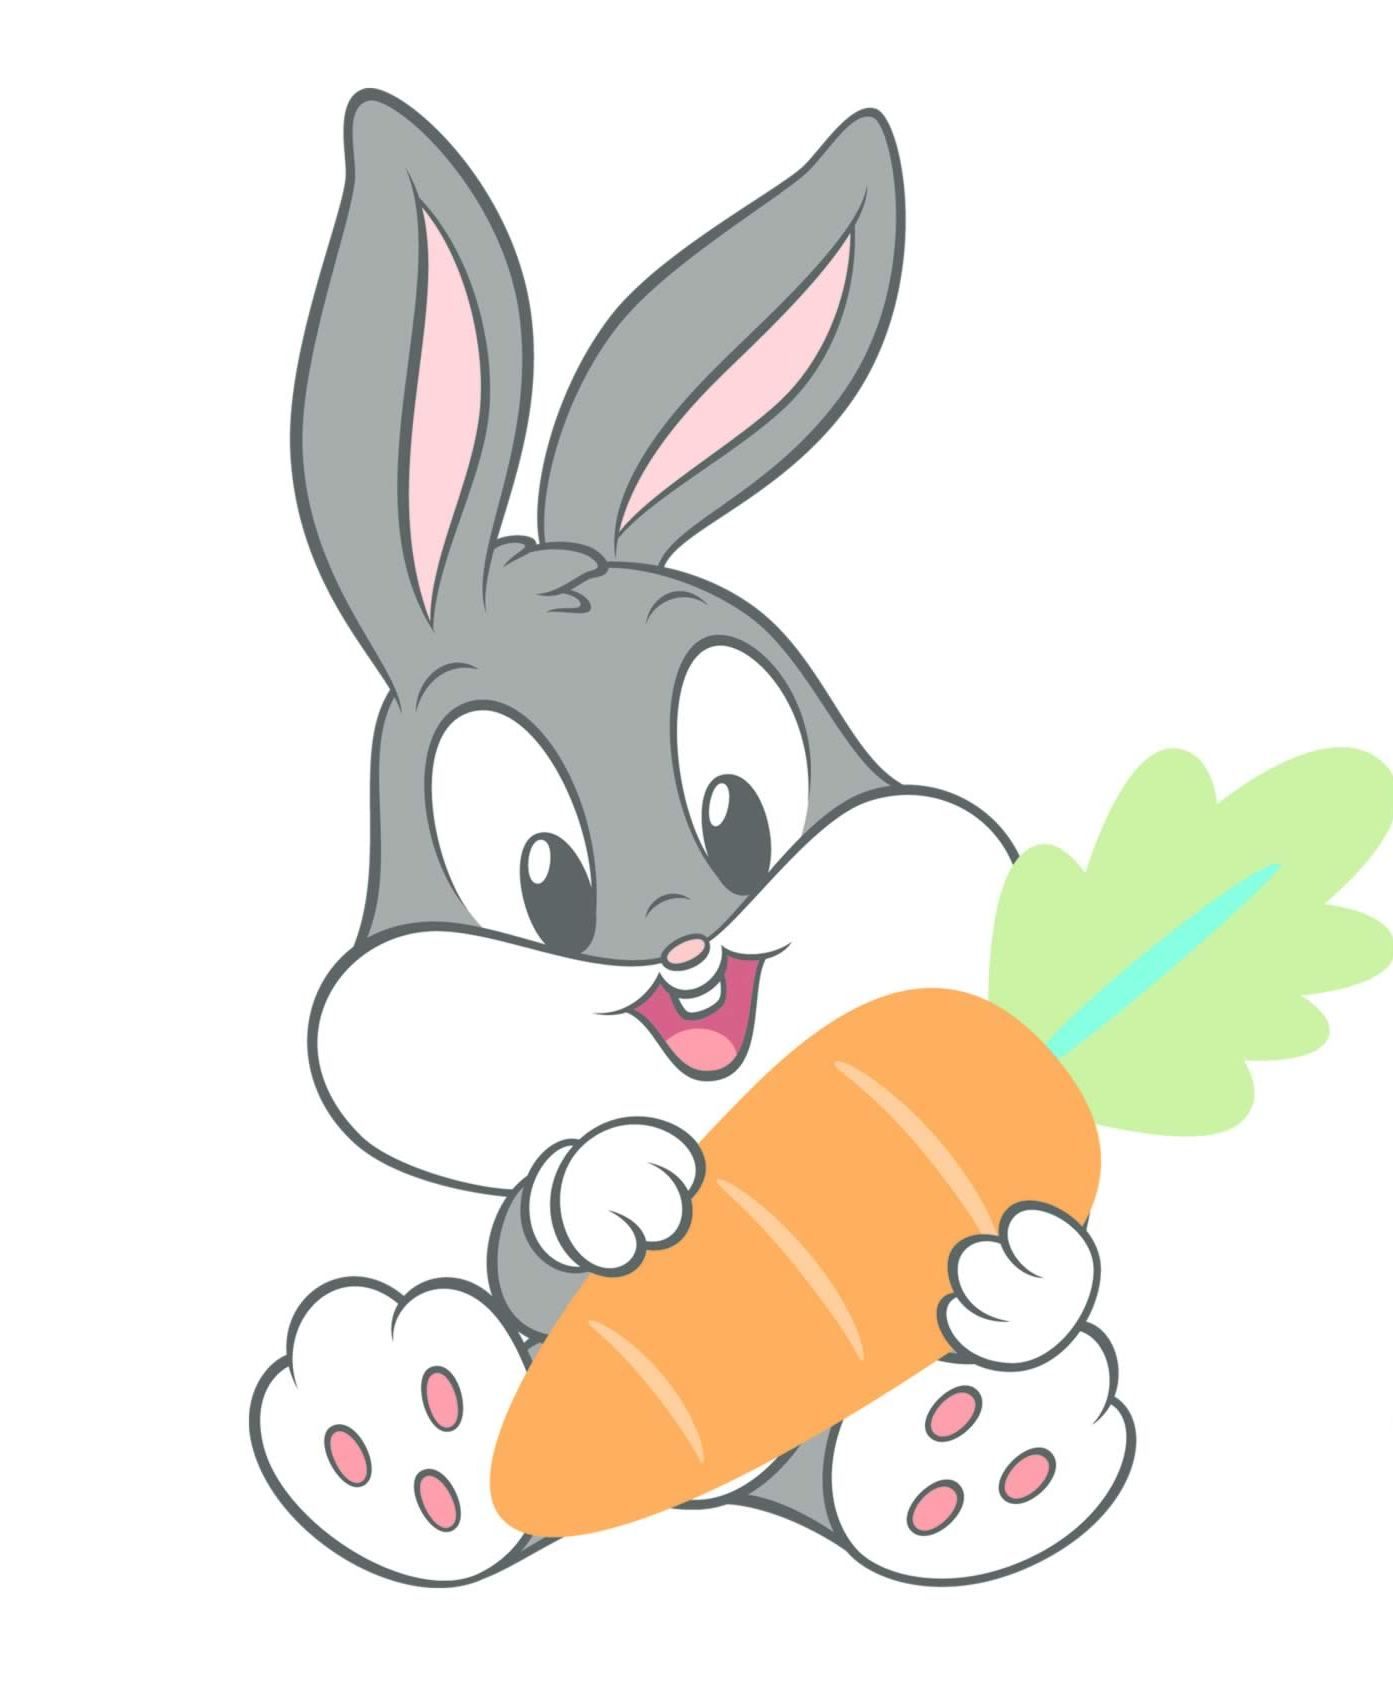 bugs bunny baby picture, bugs bunny baby wallpaper